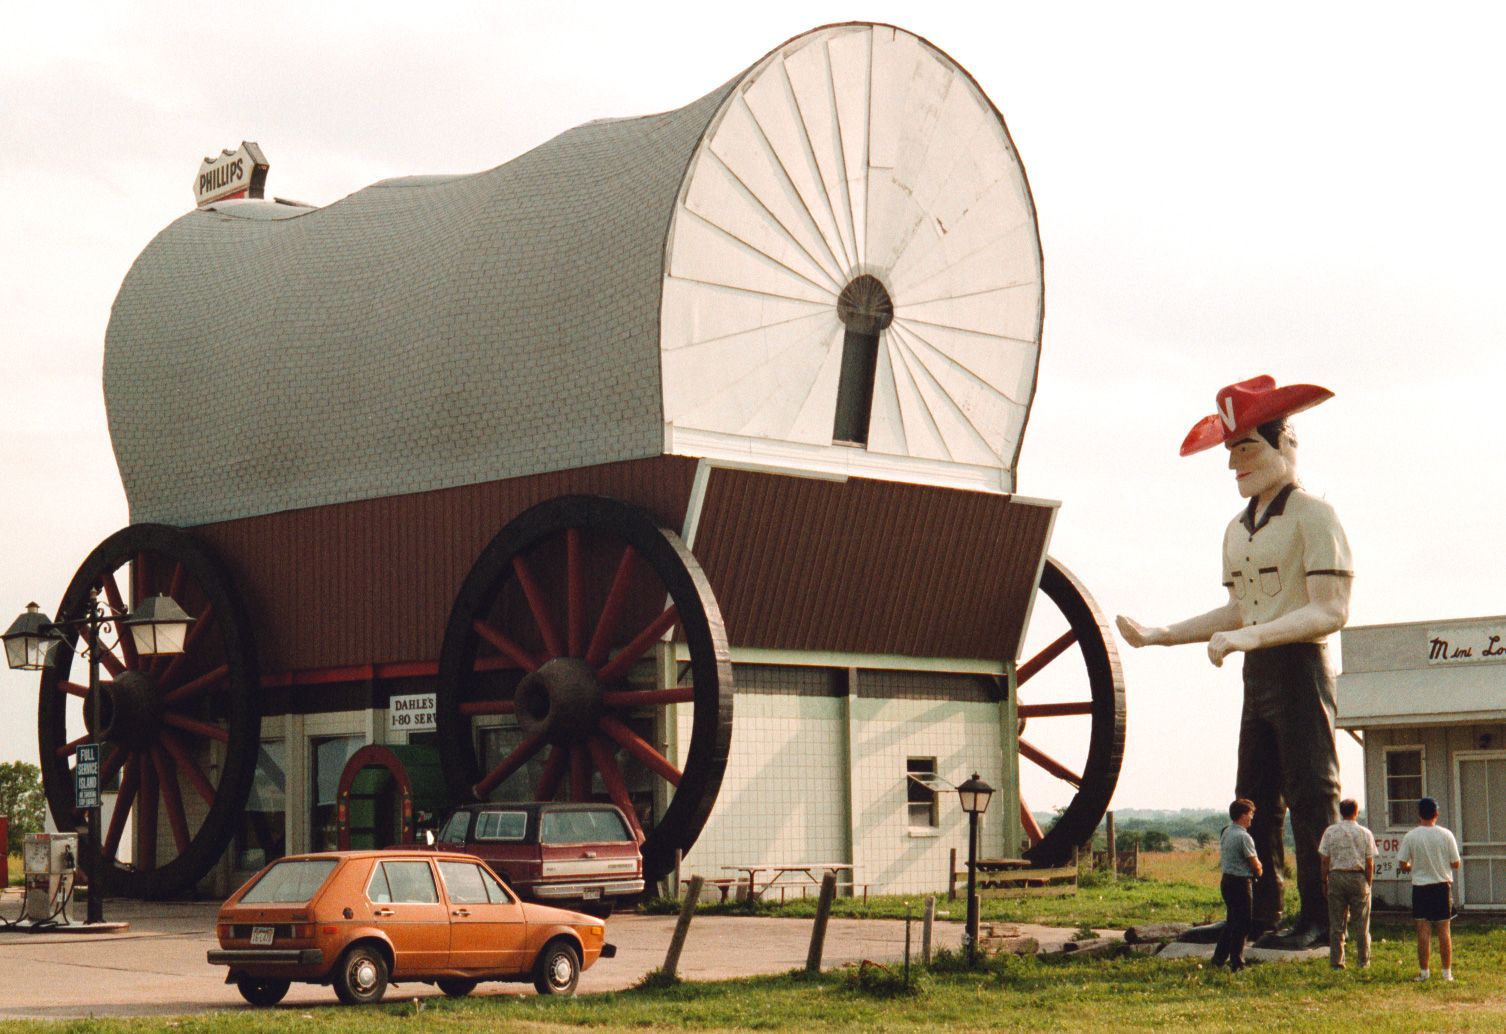 
World’s first covered wagon-shaped gas station, world record in Milford, Nebraska